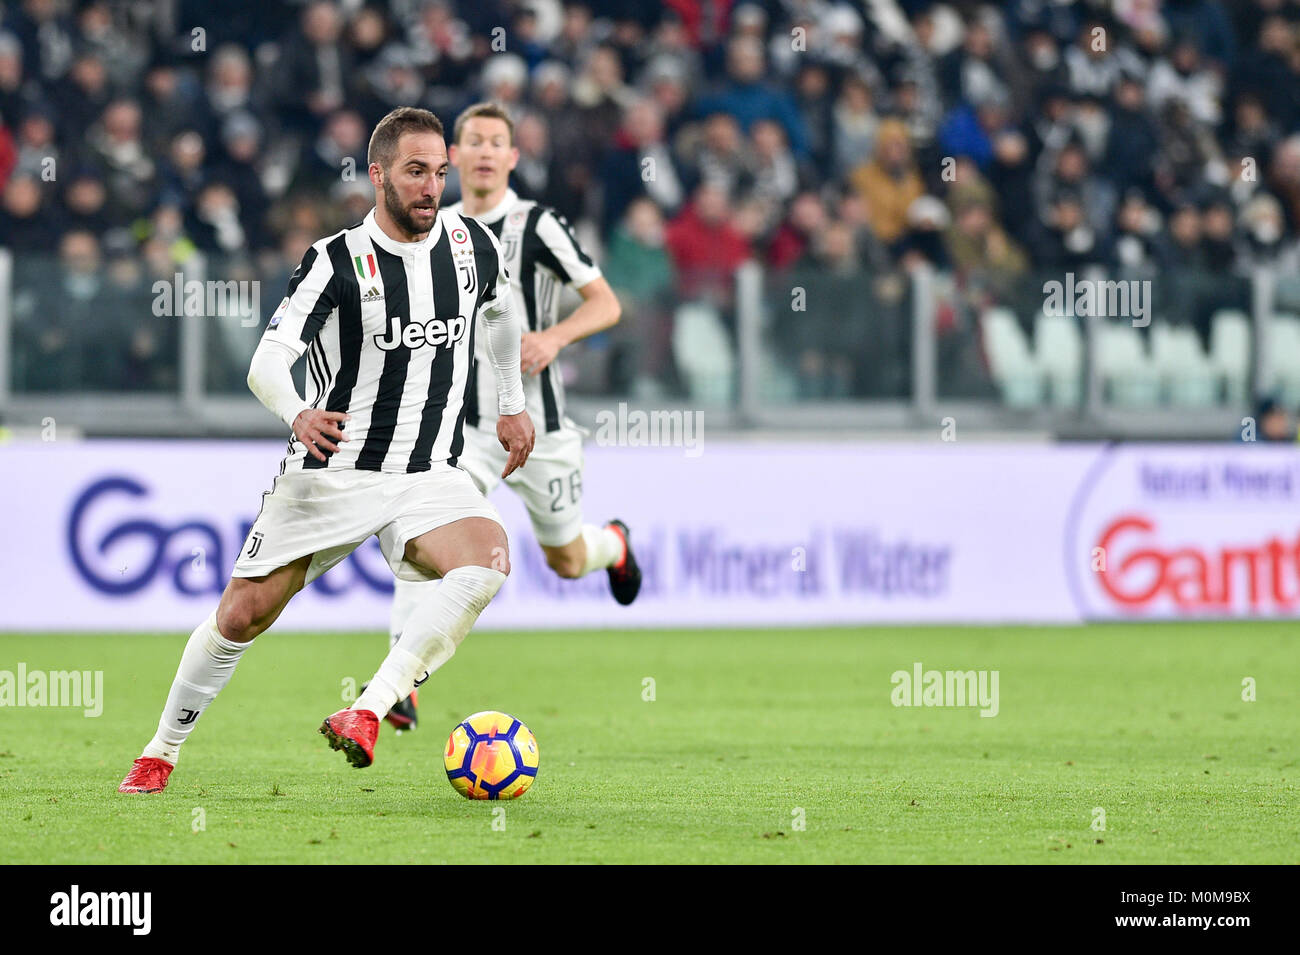 Turin, Italy. 22nd Jan, 2018. Gonzalo Higuain (Juventus FC), during the Serie A Italia football match between Juventus FC and Genoa CFC at Allianz Stadium on 22 January, 2018 in Turin, Italy. Credit: Antonio Polia/Alamy Live News Stock Photo